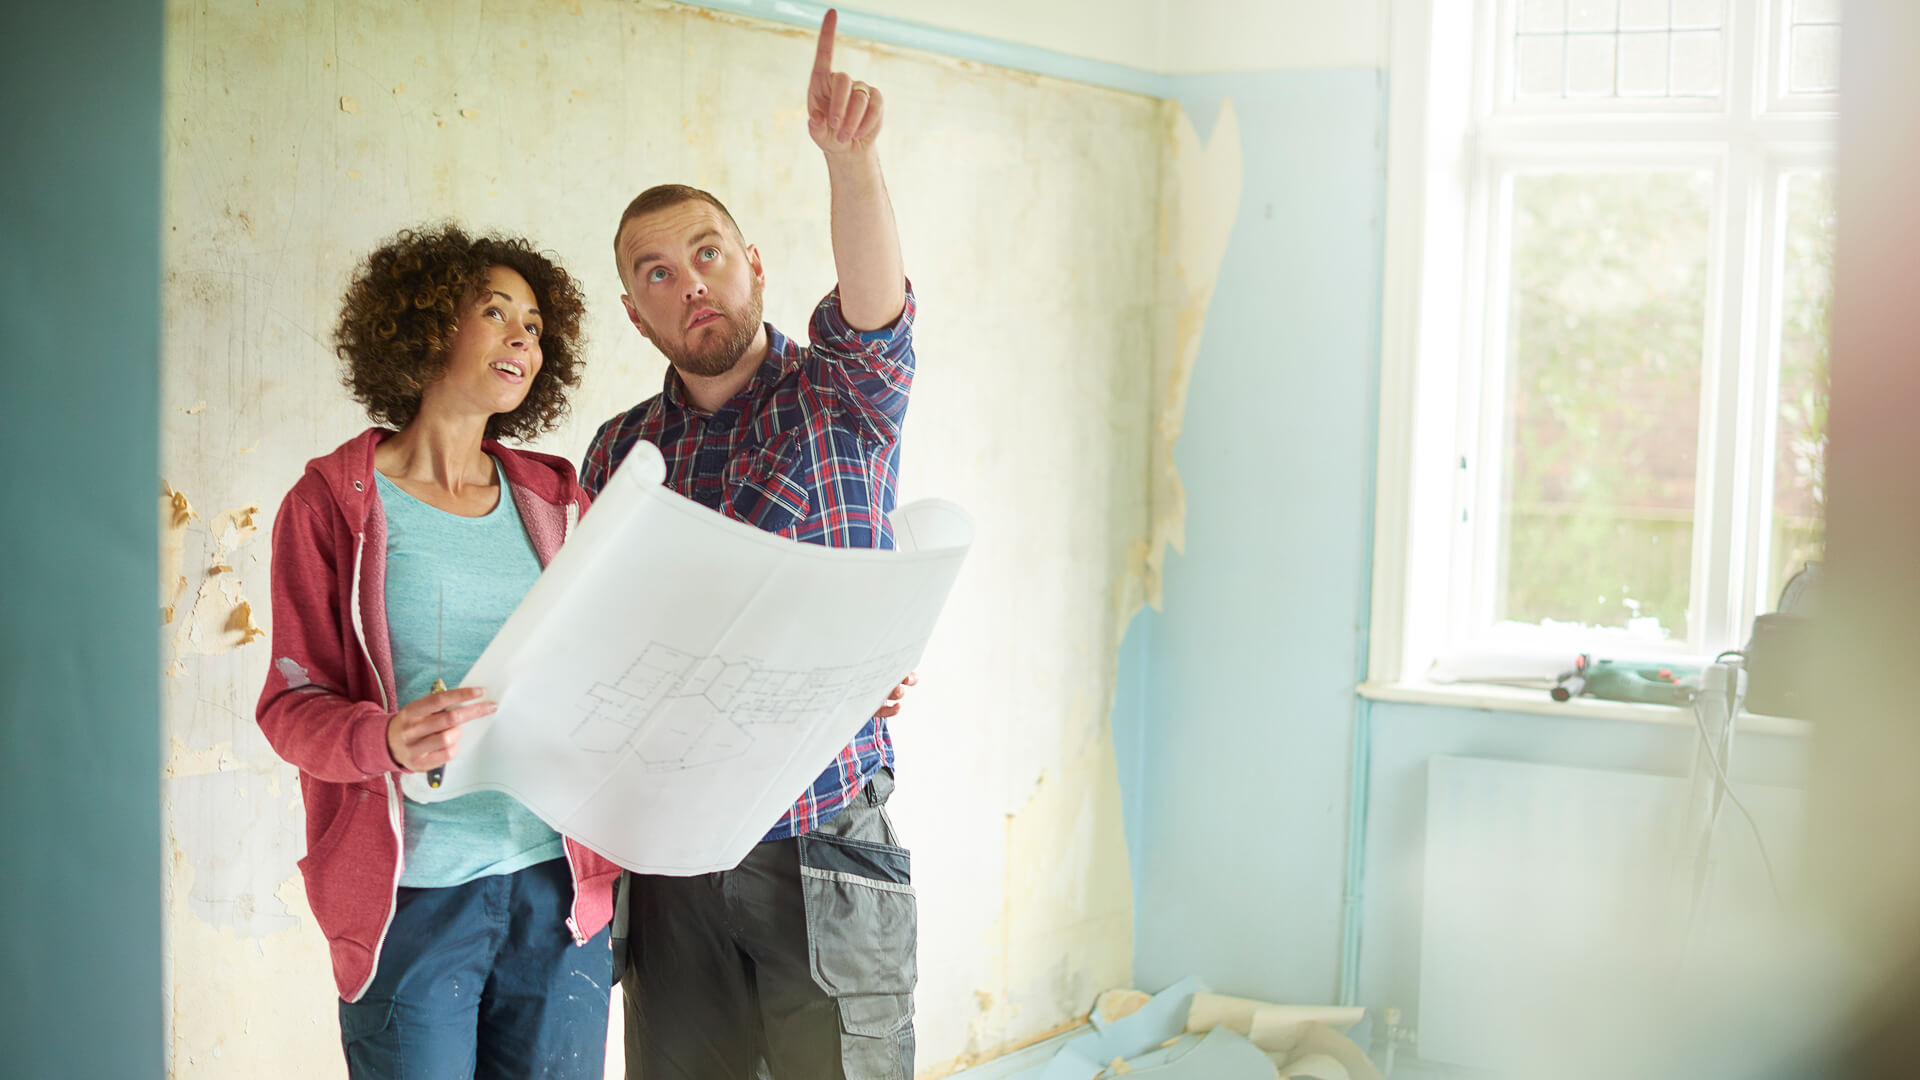 5 Things Most People Don’t Know About Common Home Renovation Projects